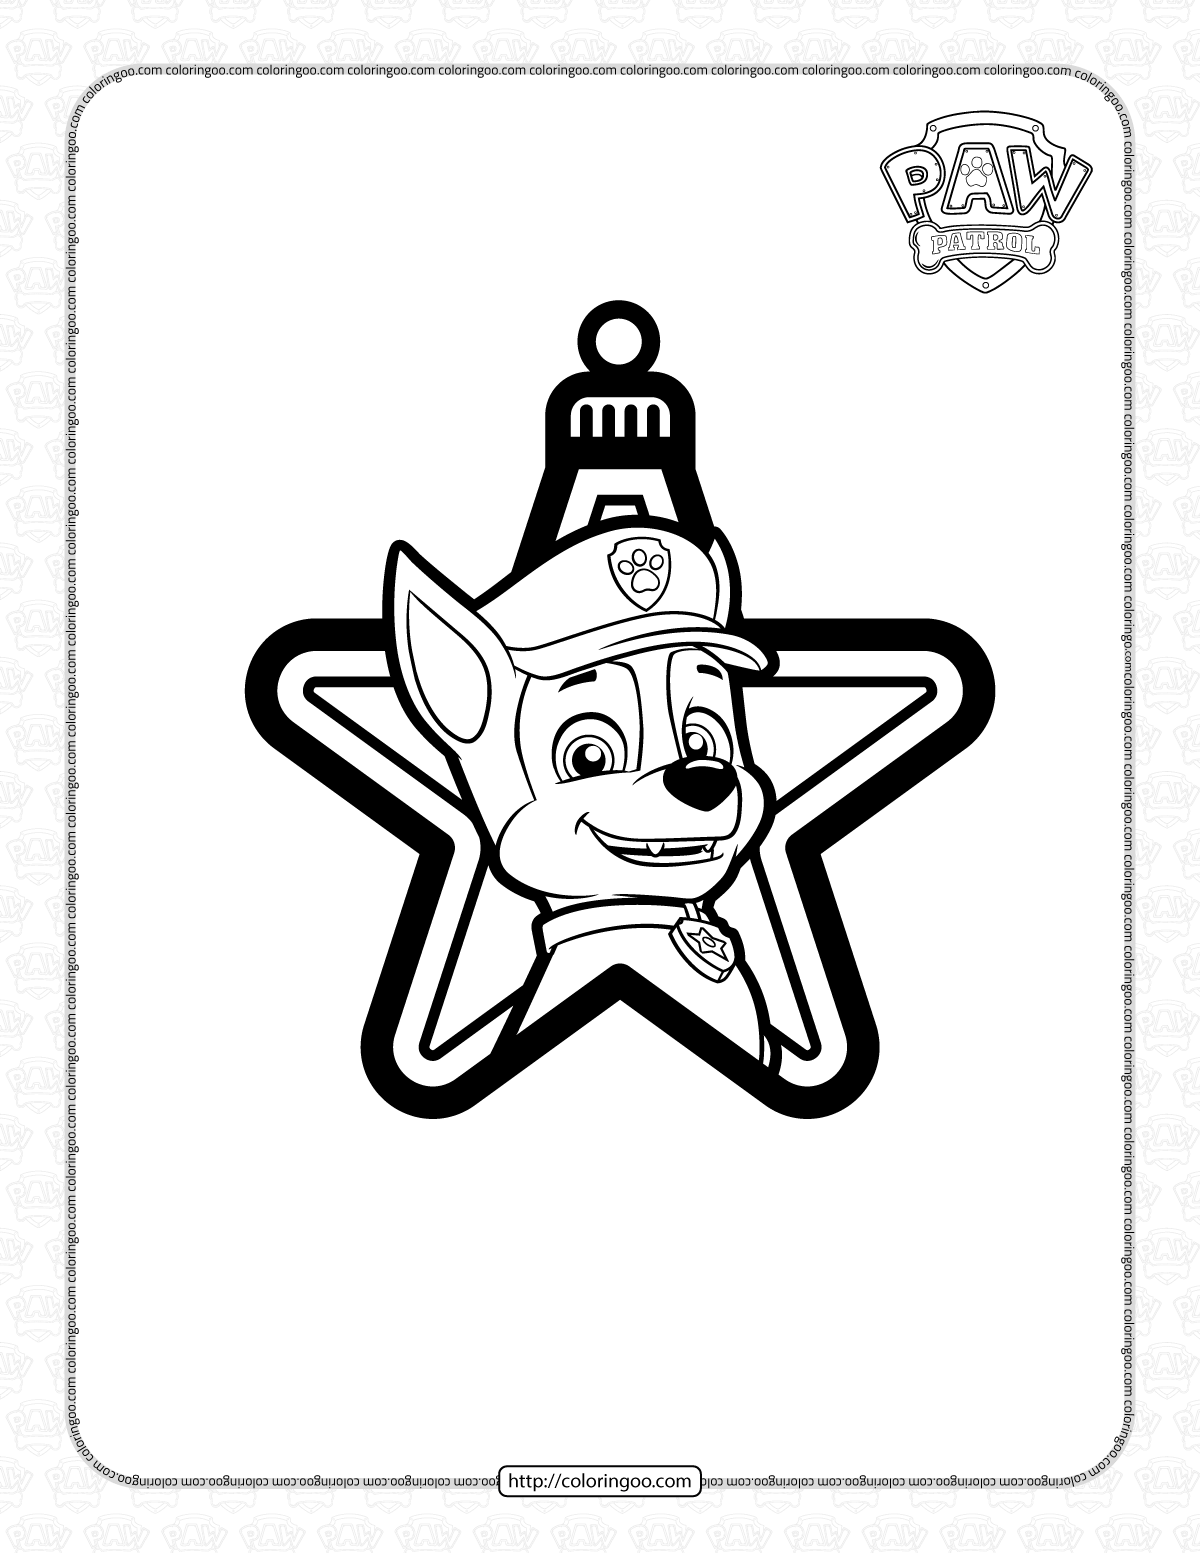 paw patrol chase christmas ornaments coloring page